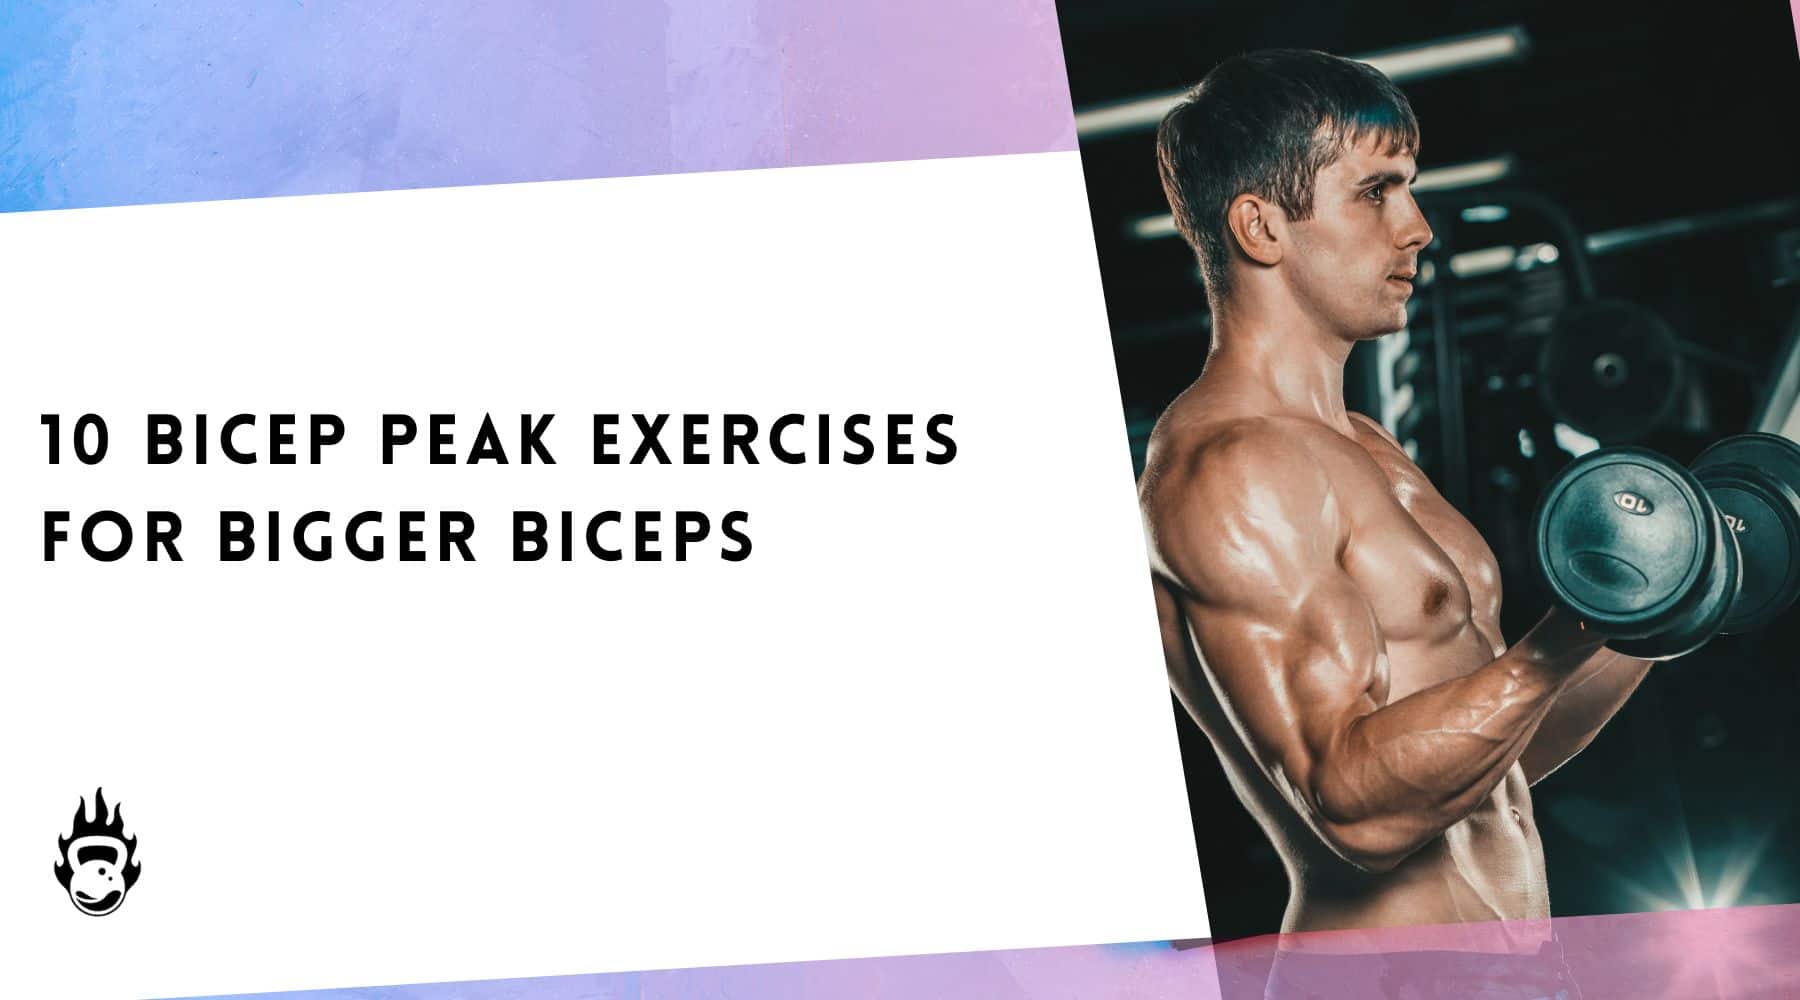 6 Biceps Exercises for Women, Sorted by Equipment Type